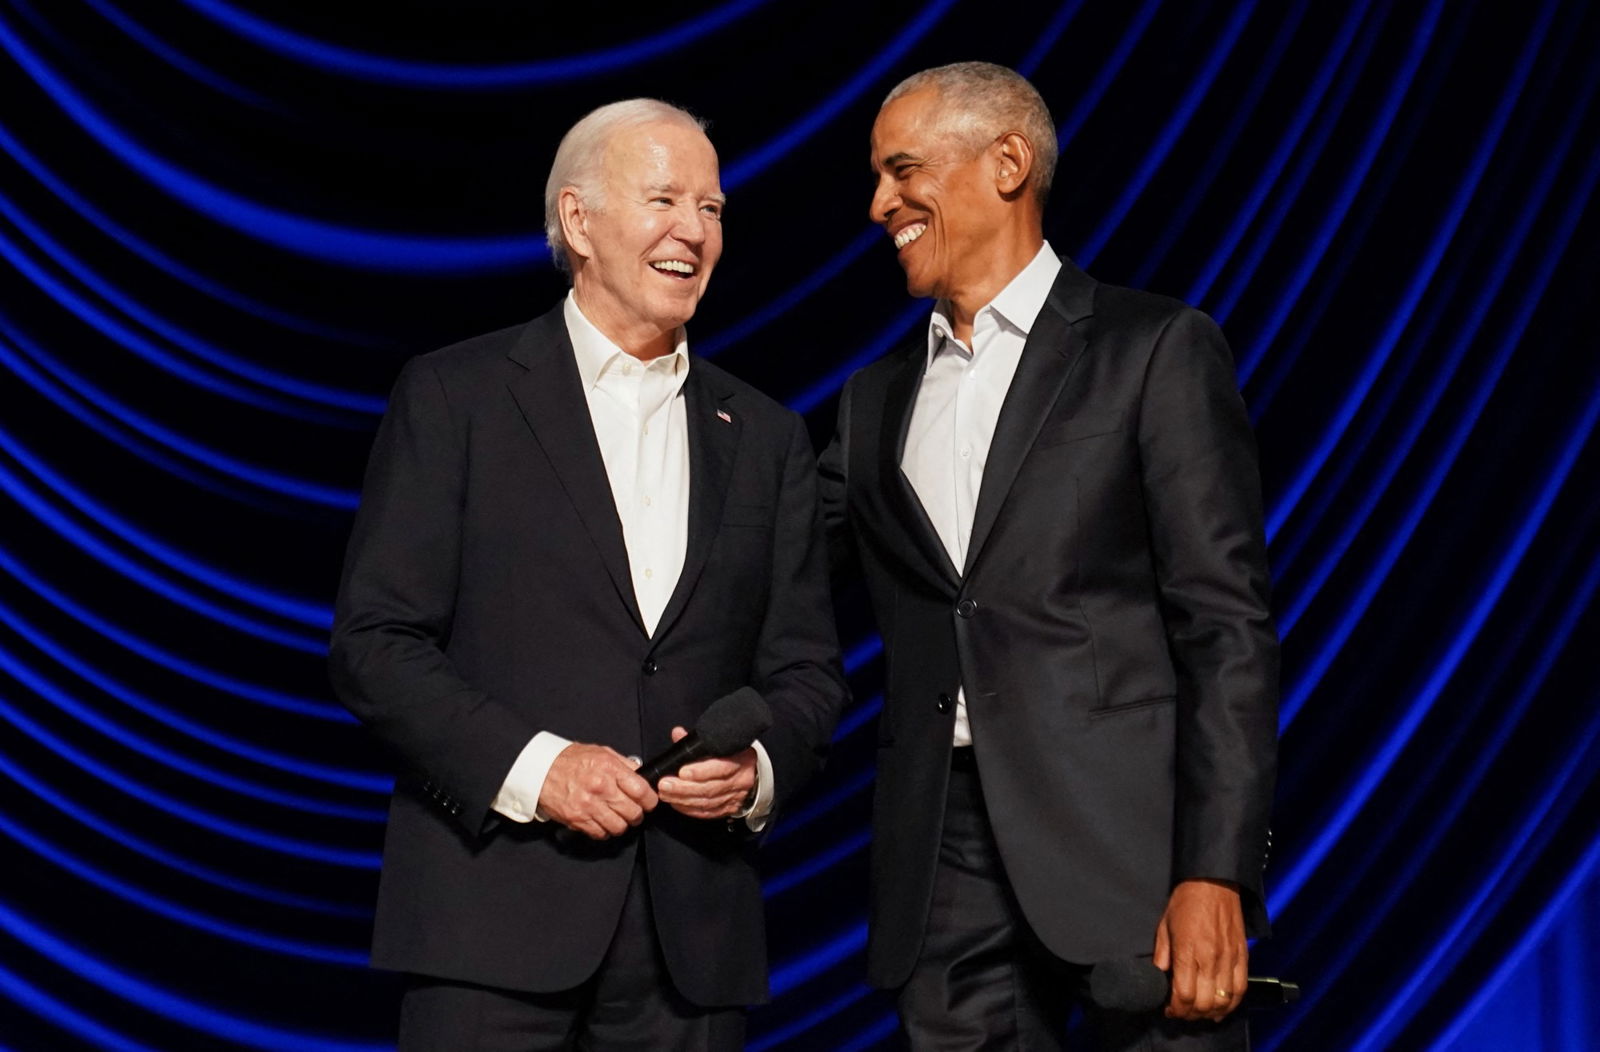 Biden and Obama laugh on stage